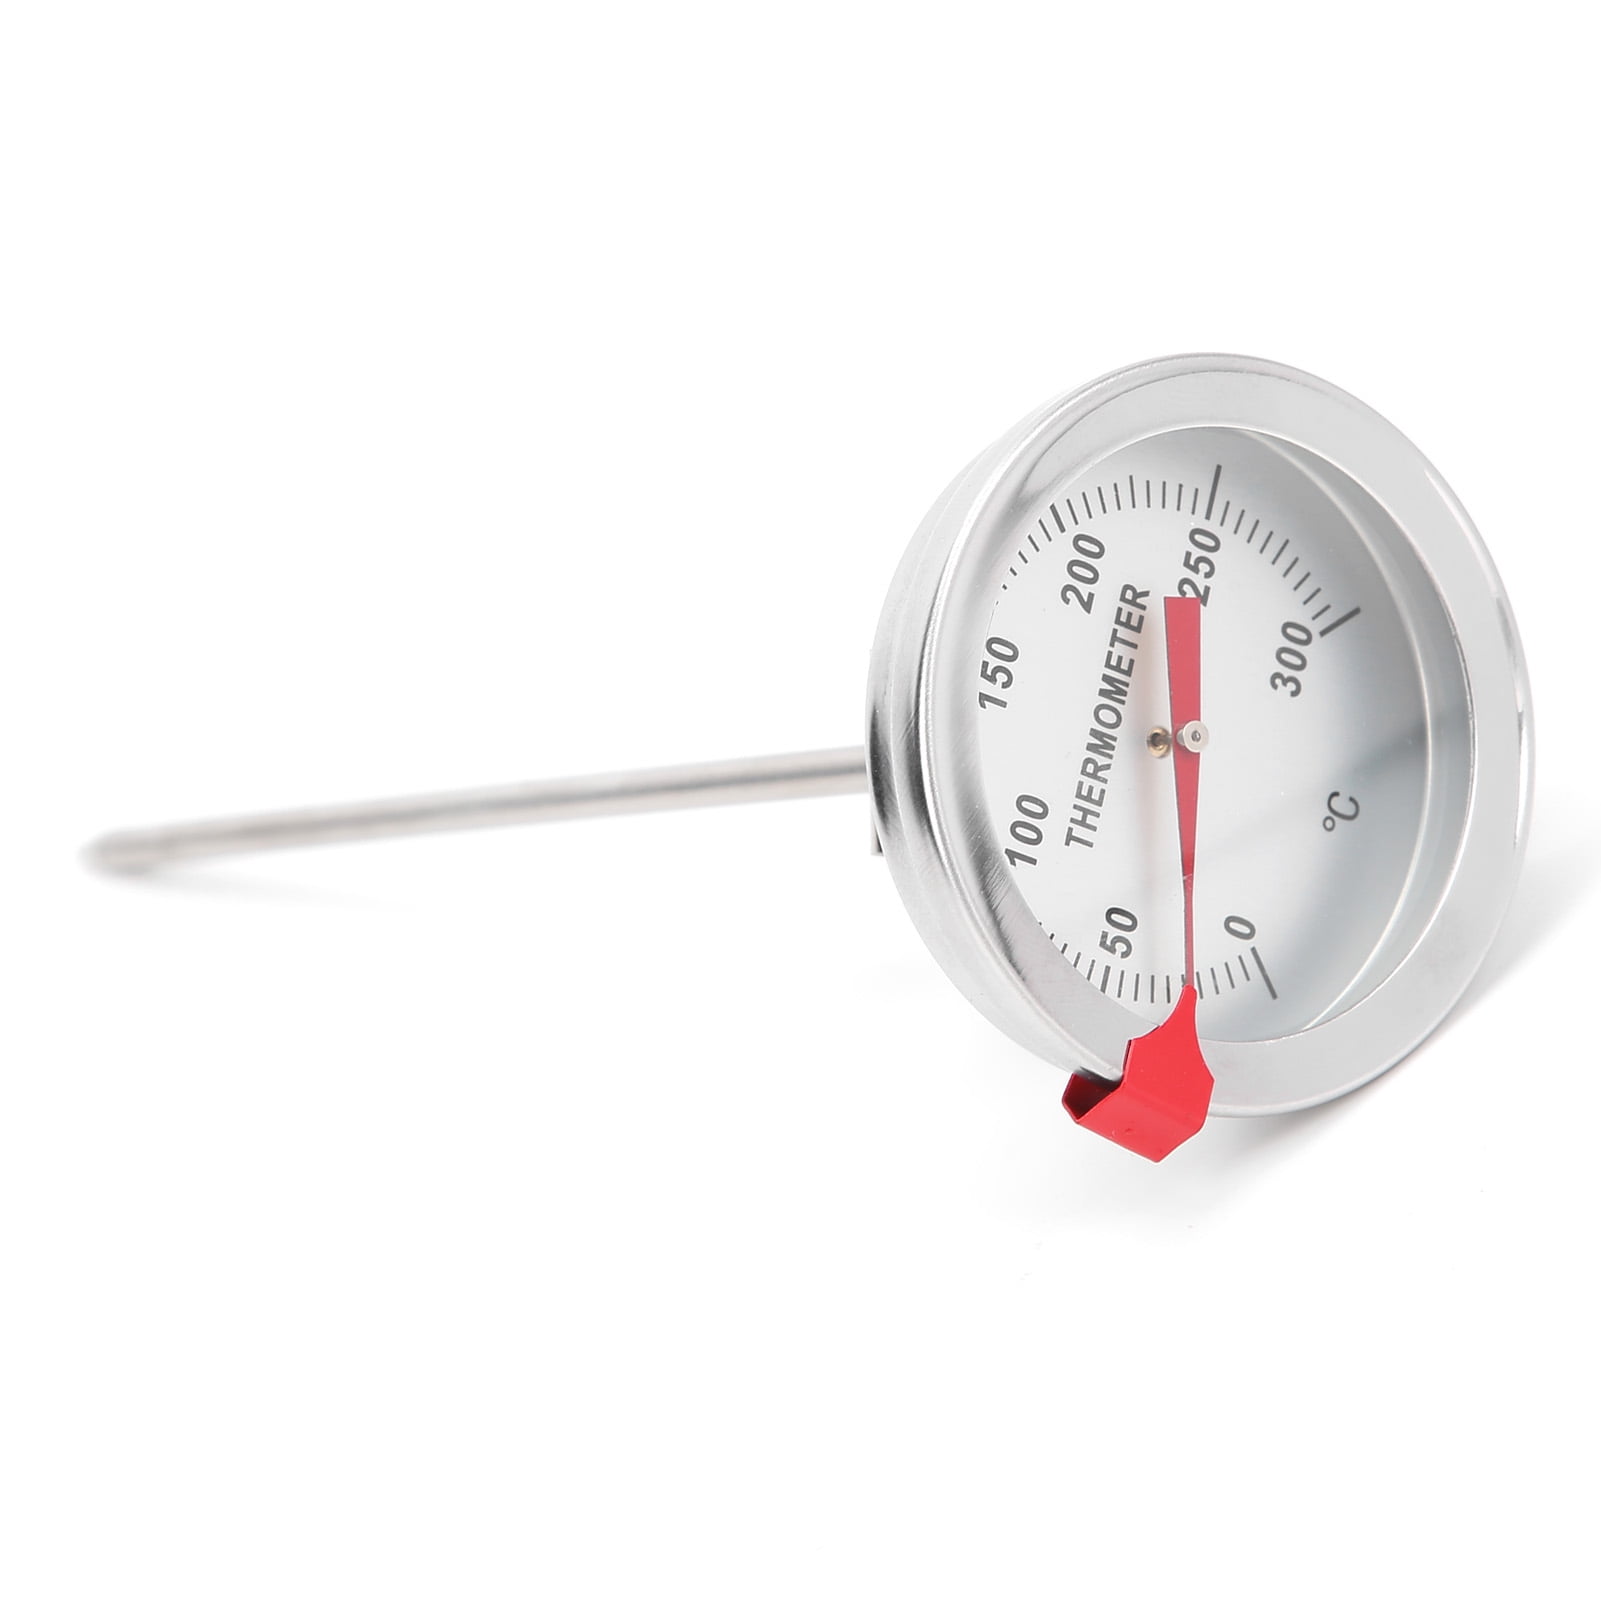 100°-400°F NSF Listed Update THCF-20D Candy/Deep Fry Thermometer 2" Dial Clip 